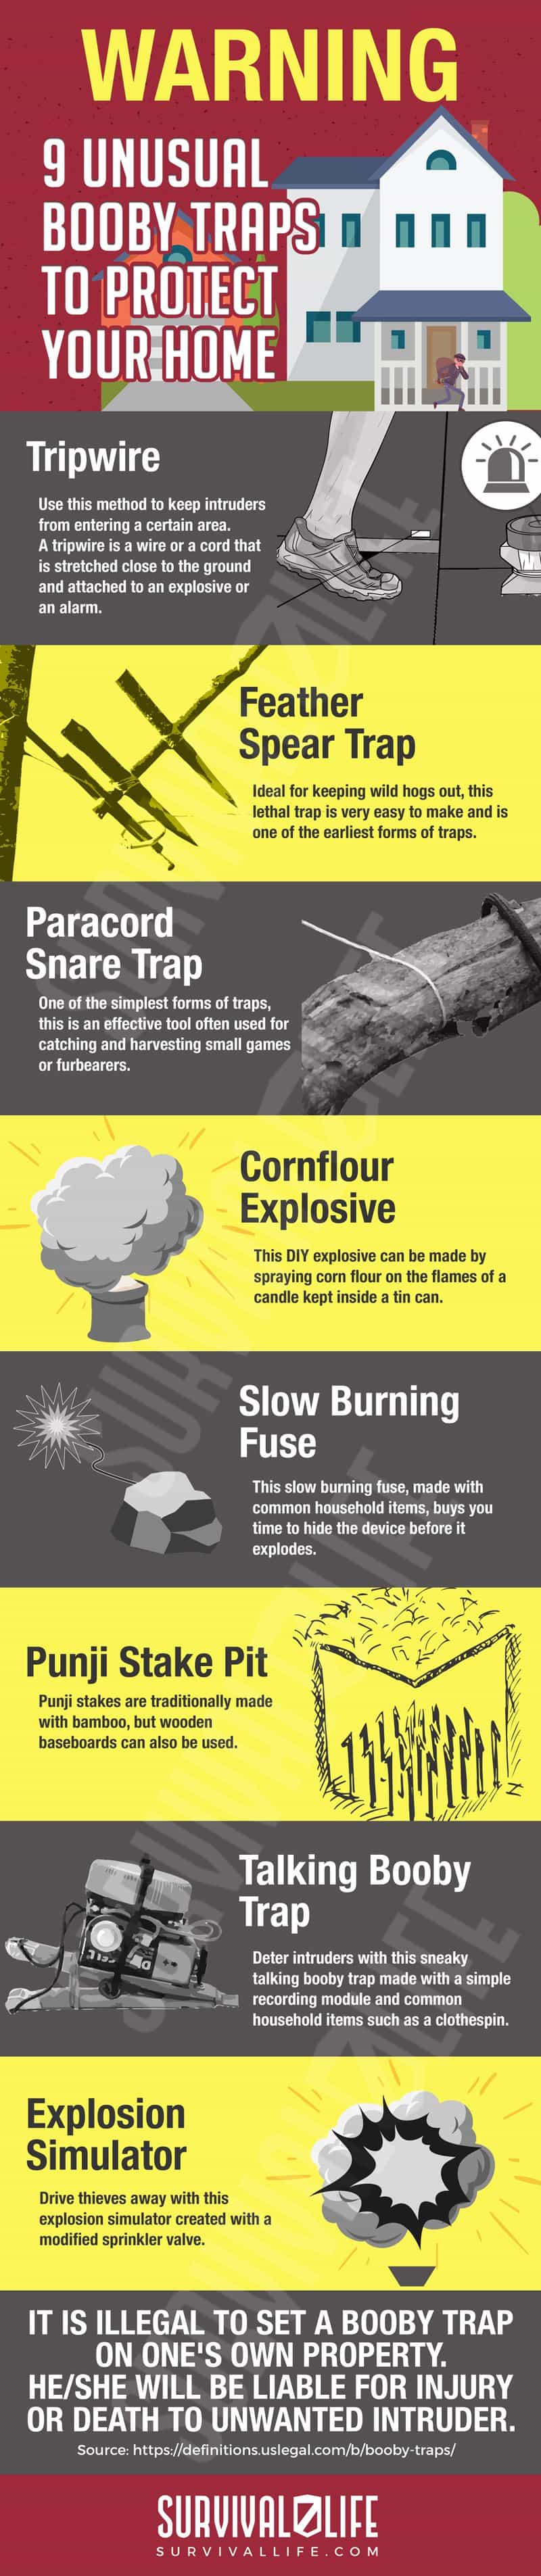 Infographic | Booby Traps Reminders | Unusual Booby Traps to Protect Your Home 